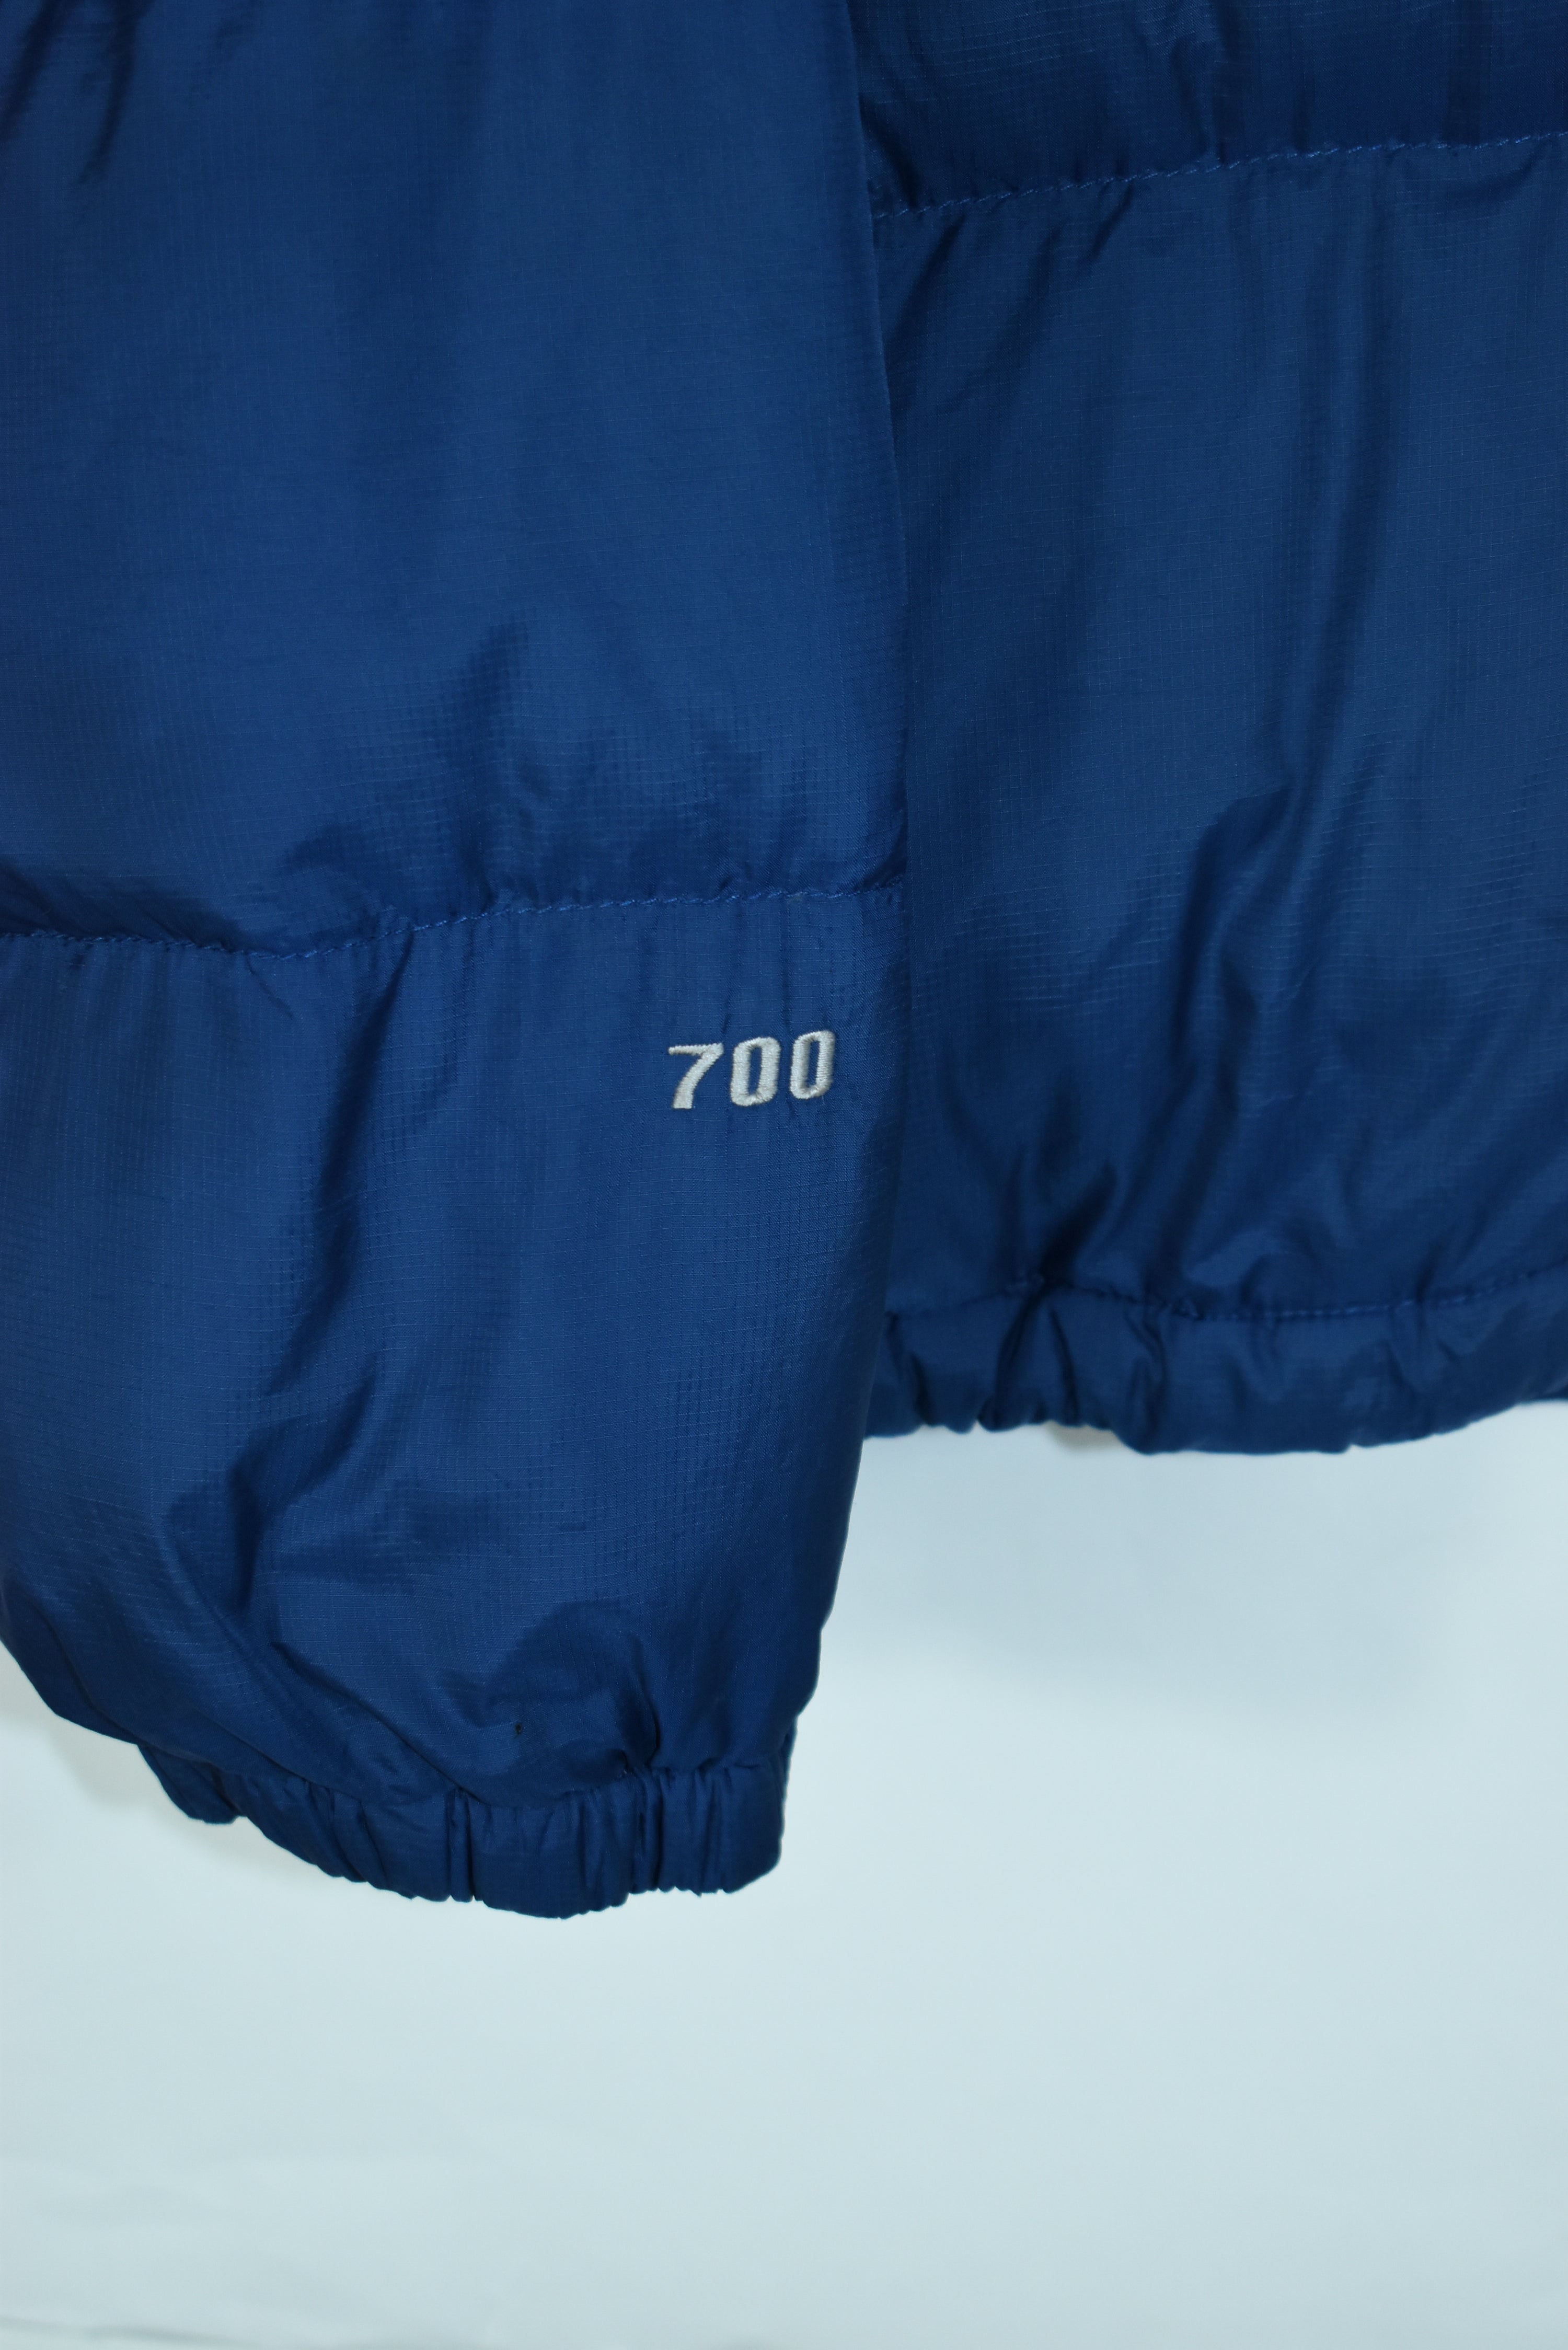 Vintage North Face Navy Puffer 700 Mens L/ XLARGE